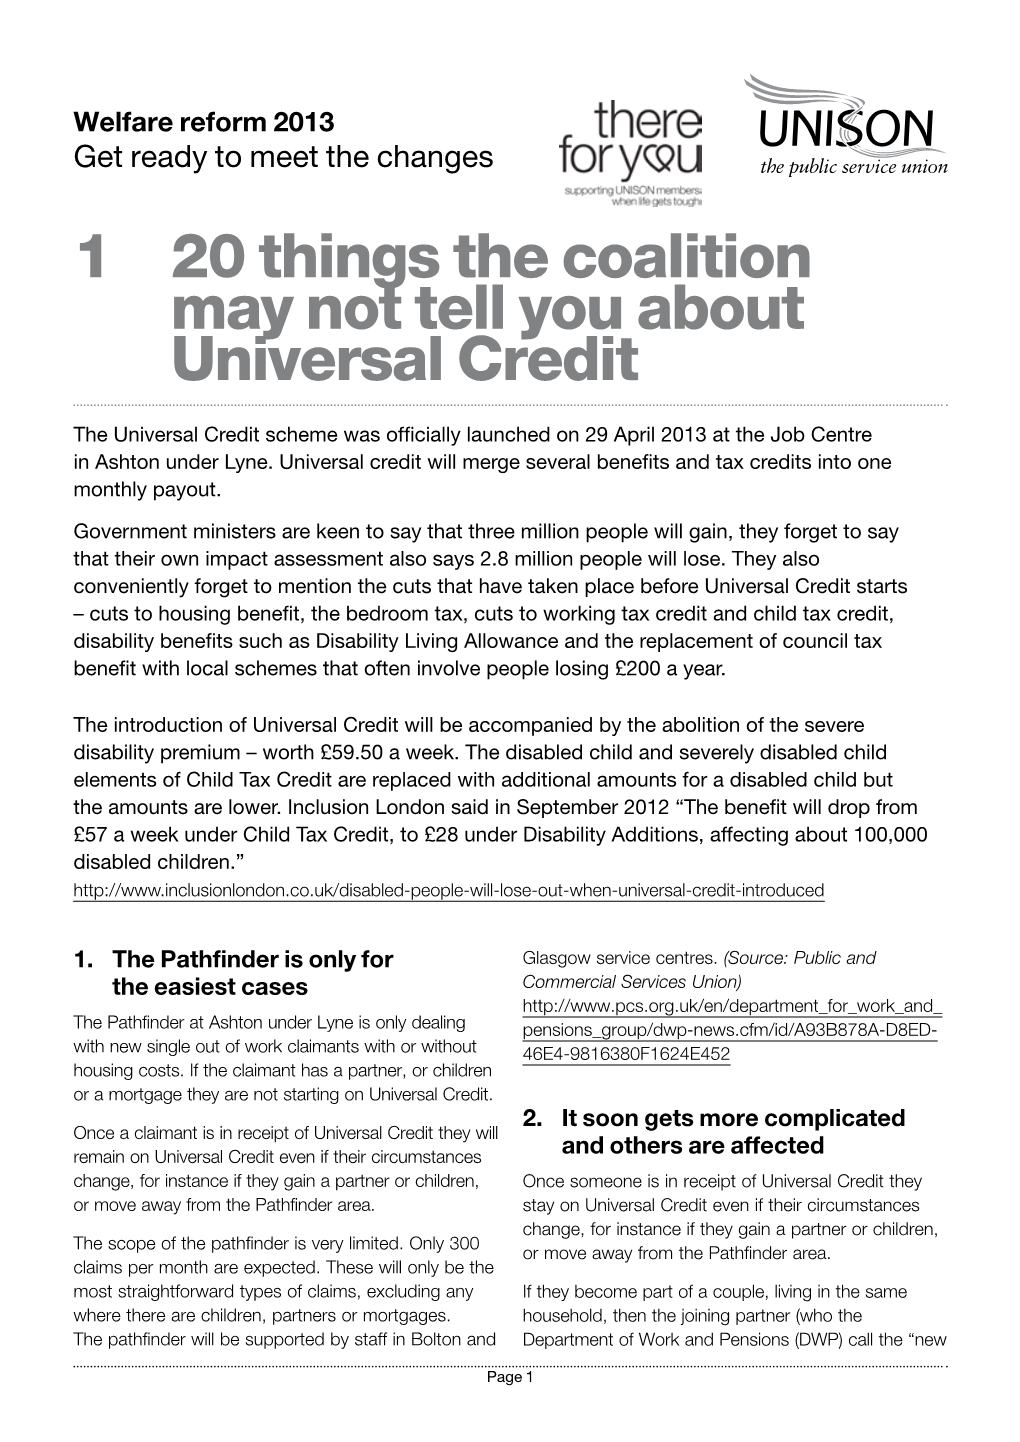 1 20 Things the Coalition May Not Tell You About Universal Credit